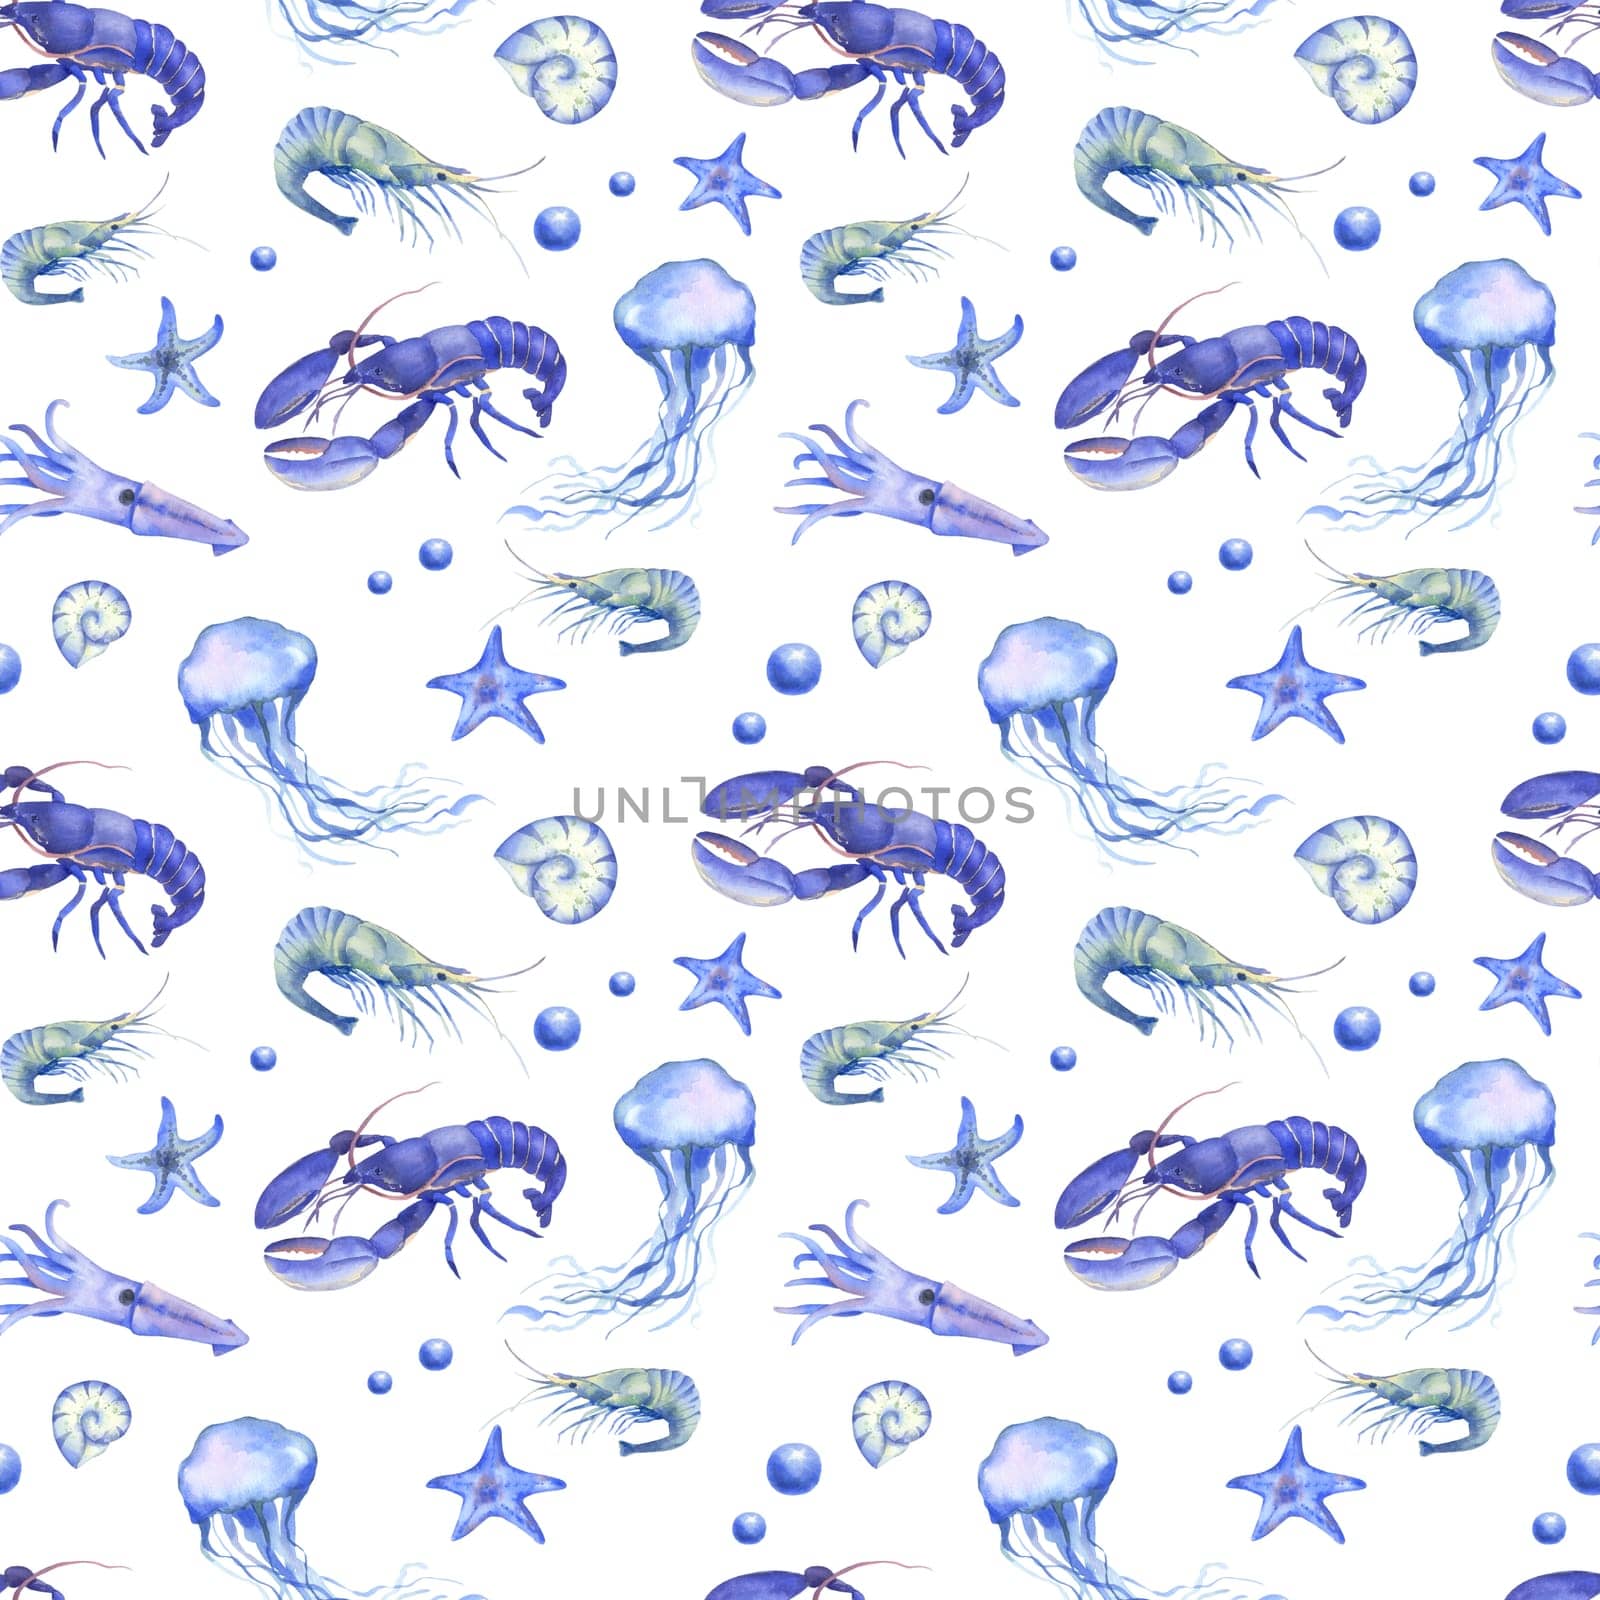 Watercolor seamless pattern with underwater sea animals. Ocean crab, lobster, jellyfish on white background by ElenaPlatova